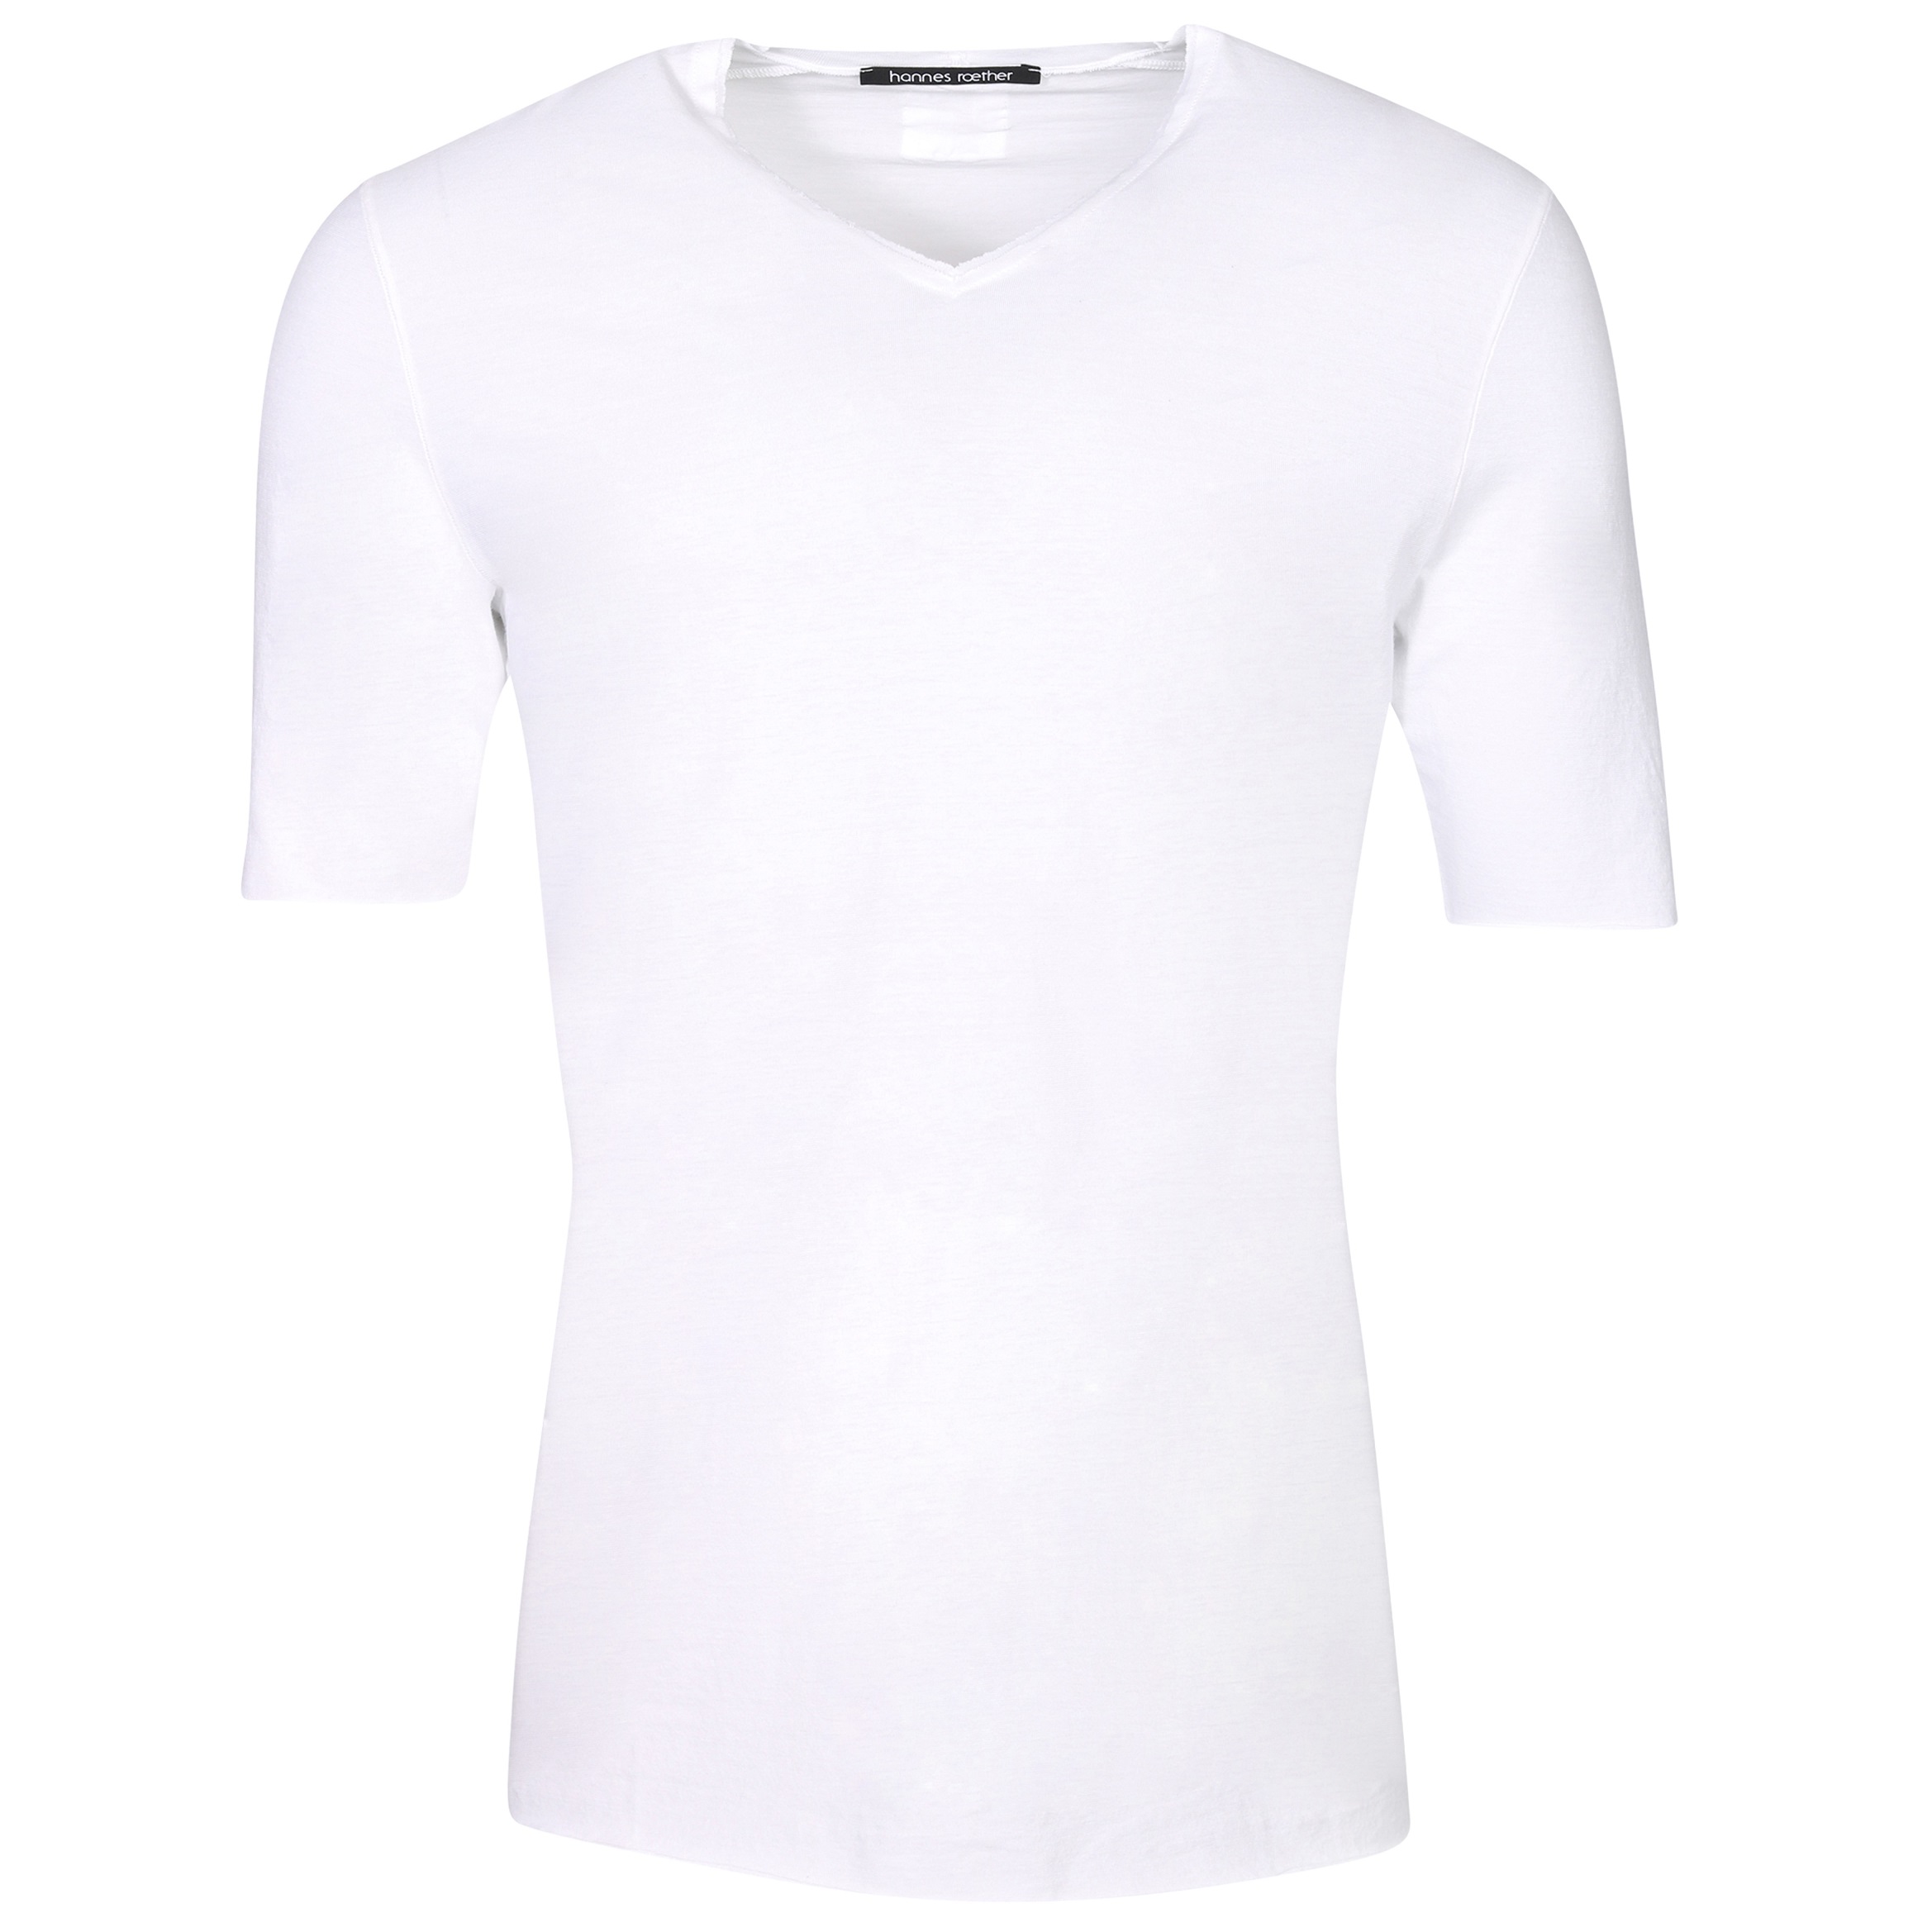 Hannes Roether V-Neck T-Shirt in White M